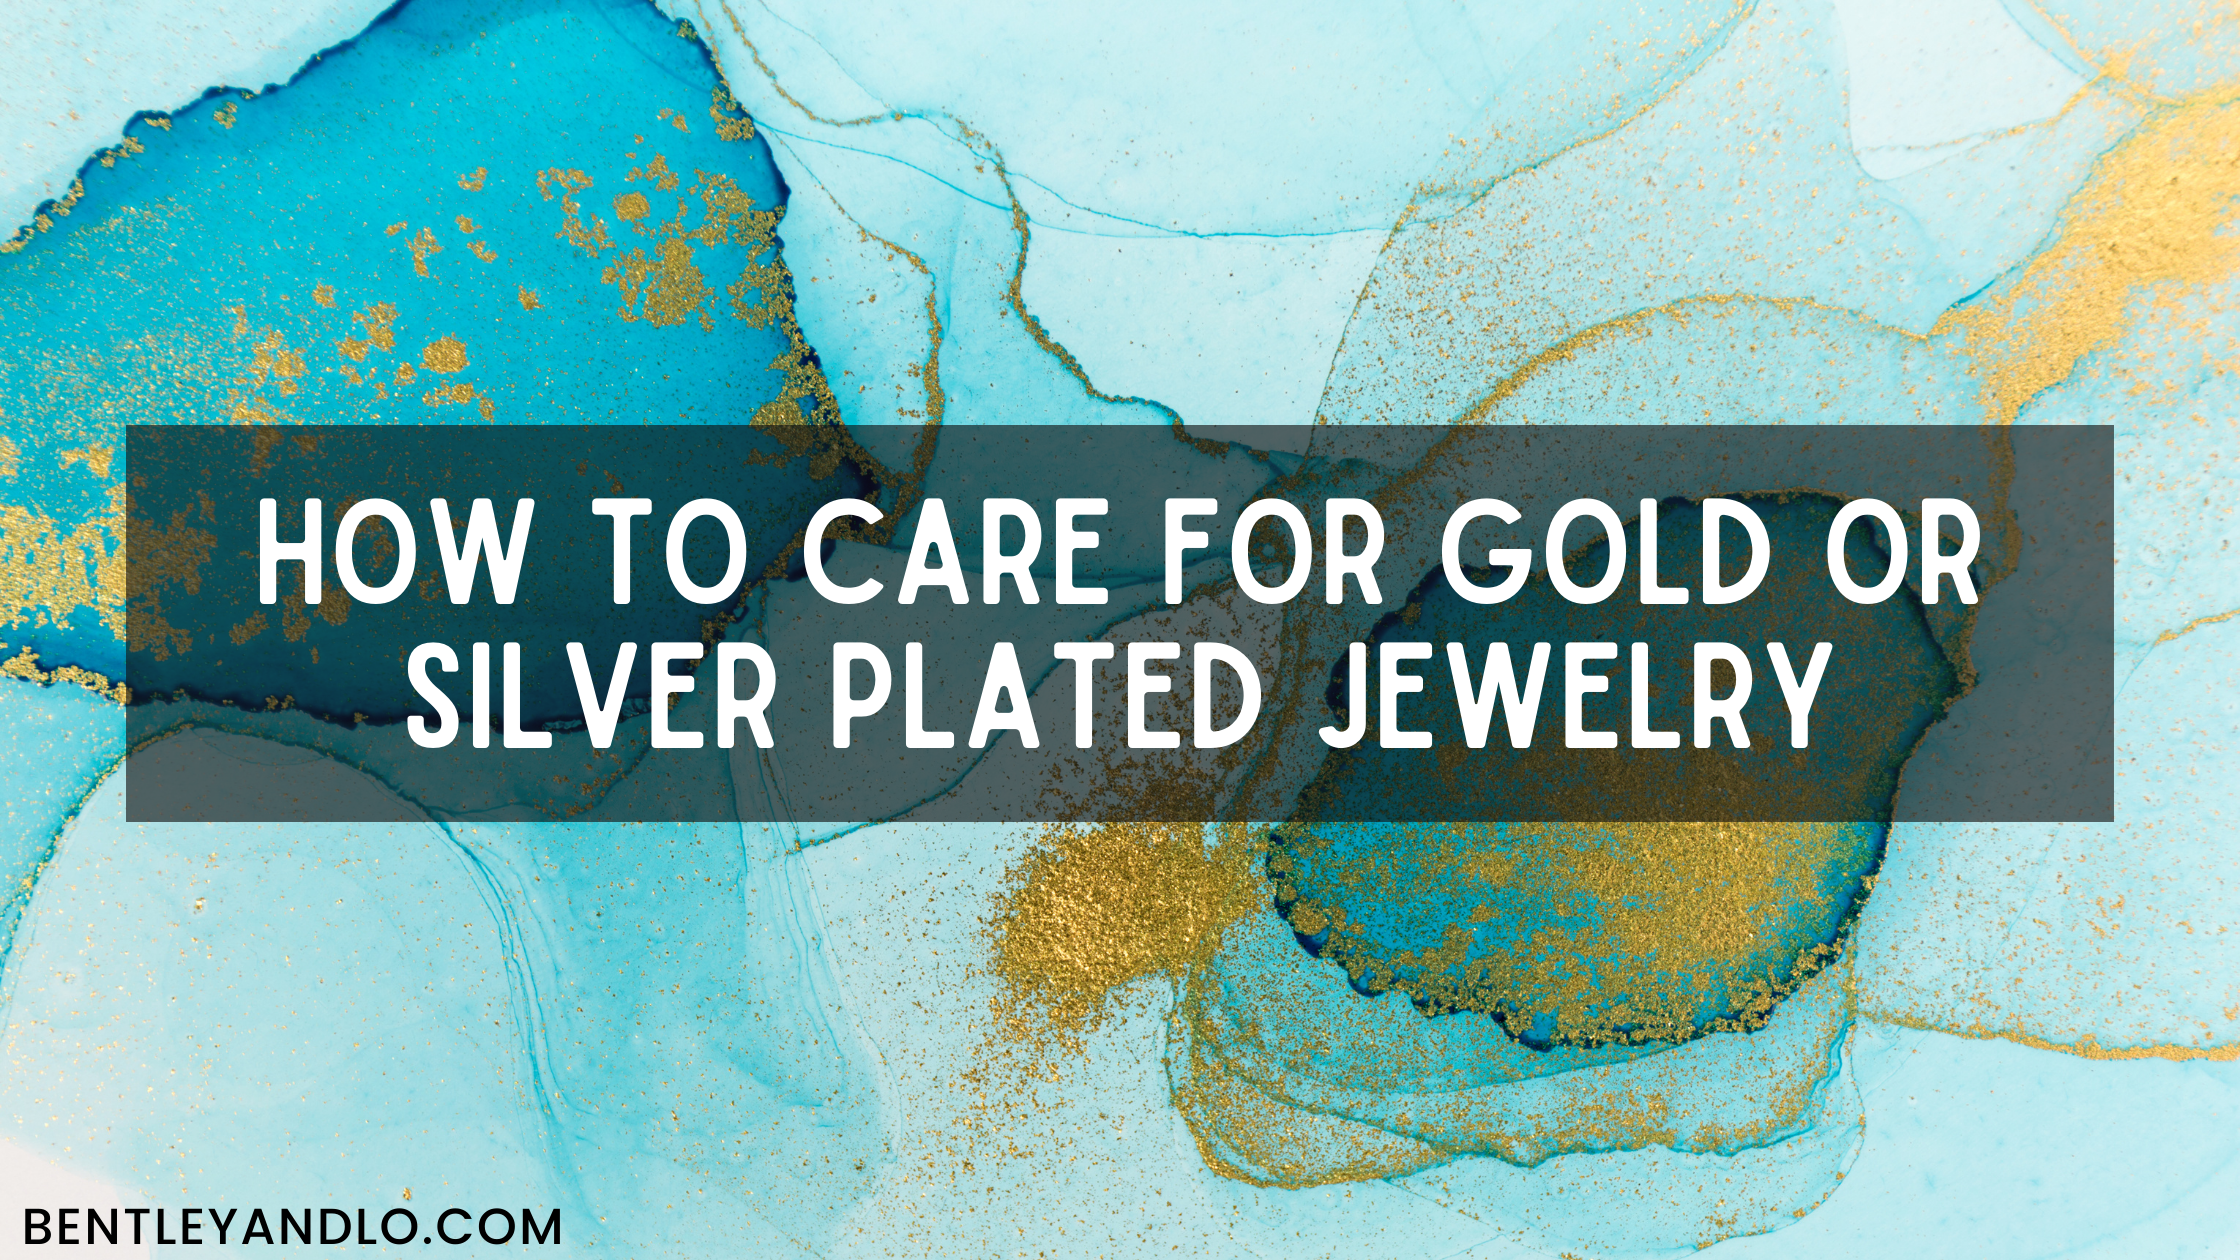 How to Care for Gold or Silver Plated Jewelry